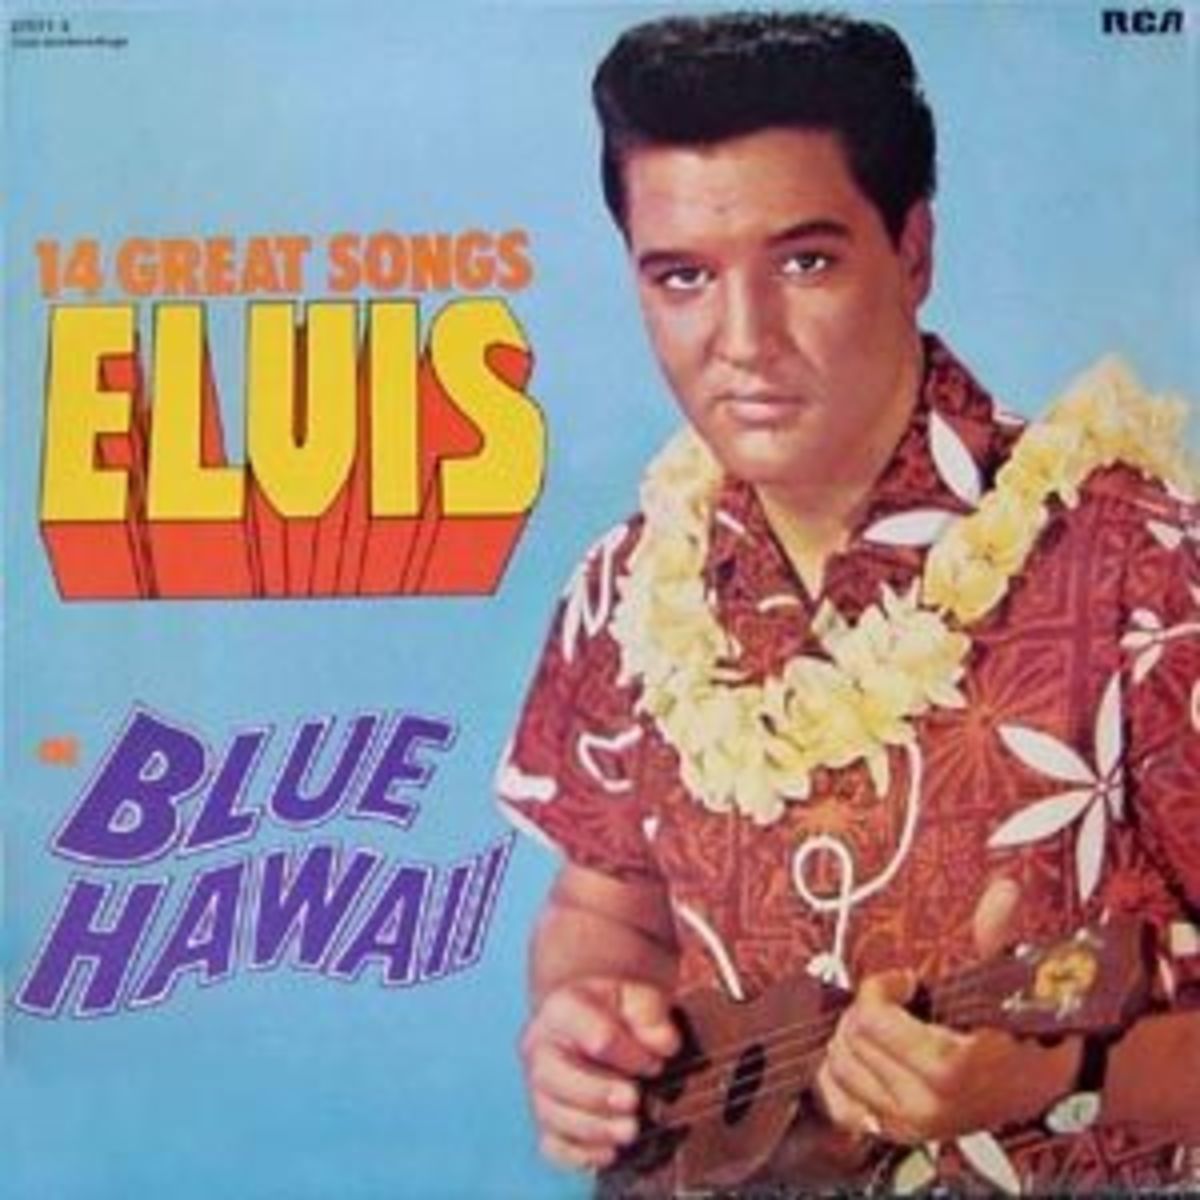 A cover of "Blue Hawaii" by Elvis Presley features in Season 6